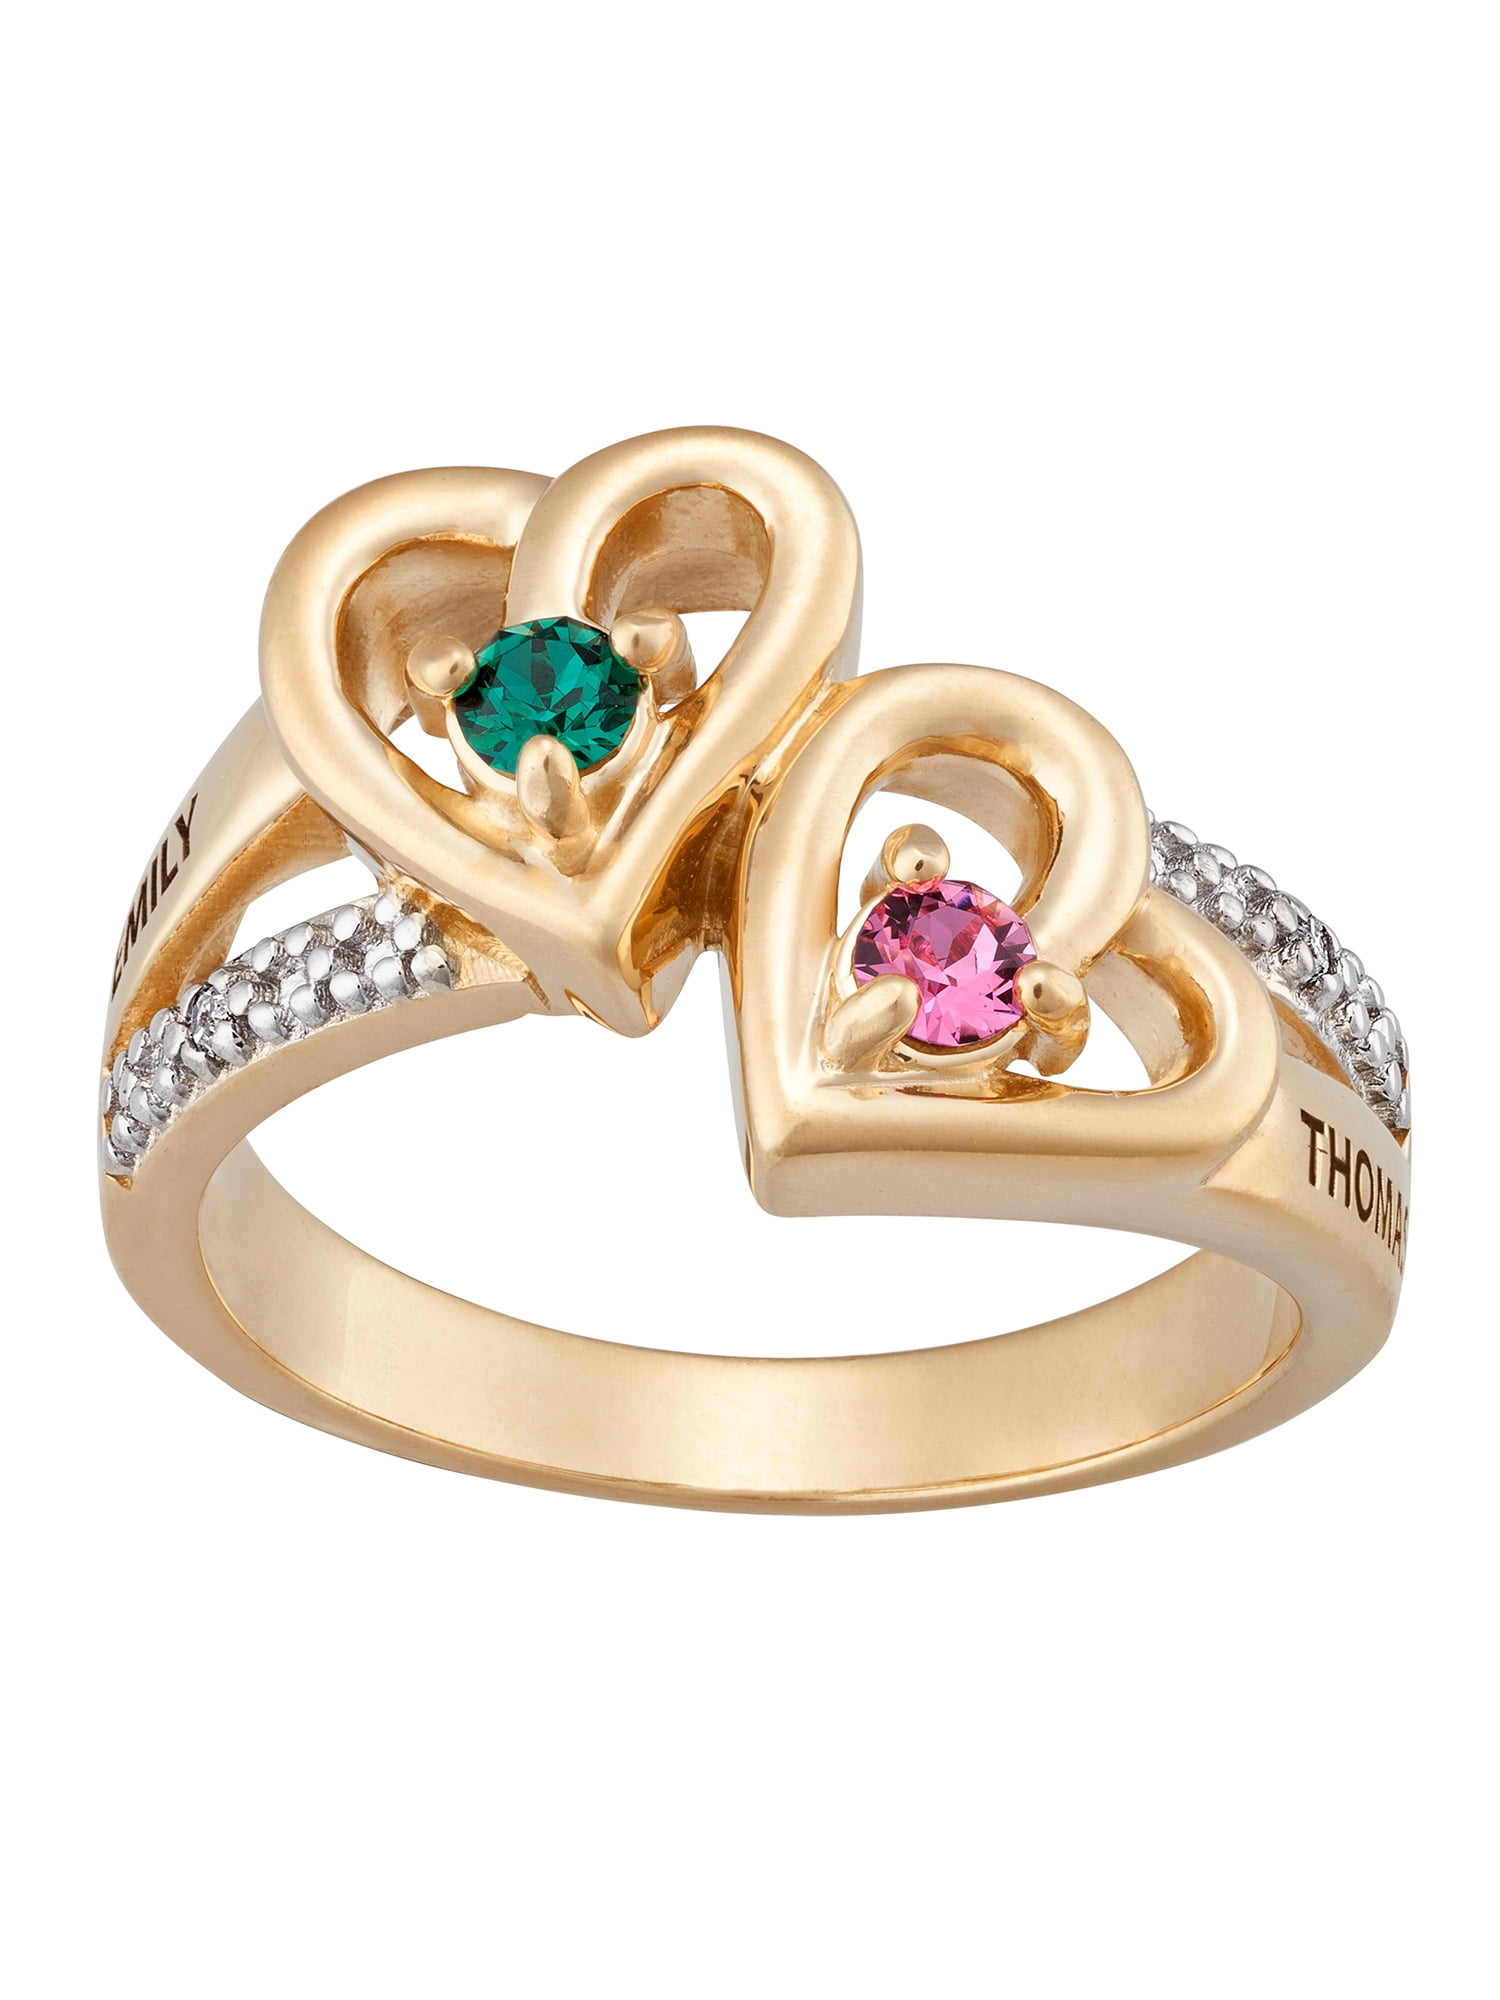 Family Ring with Birthstones and Names - MonogramHub.com